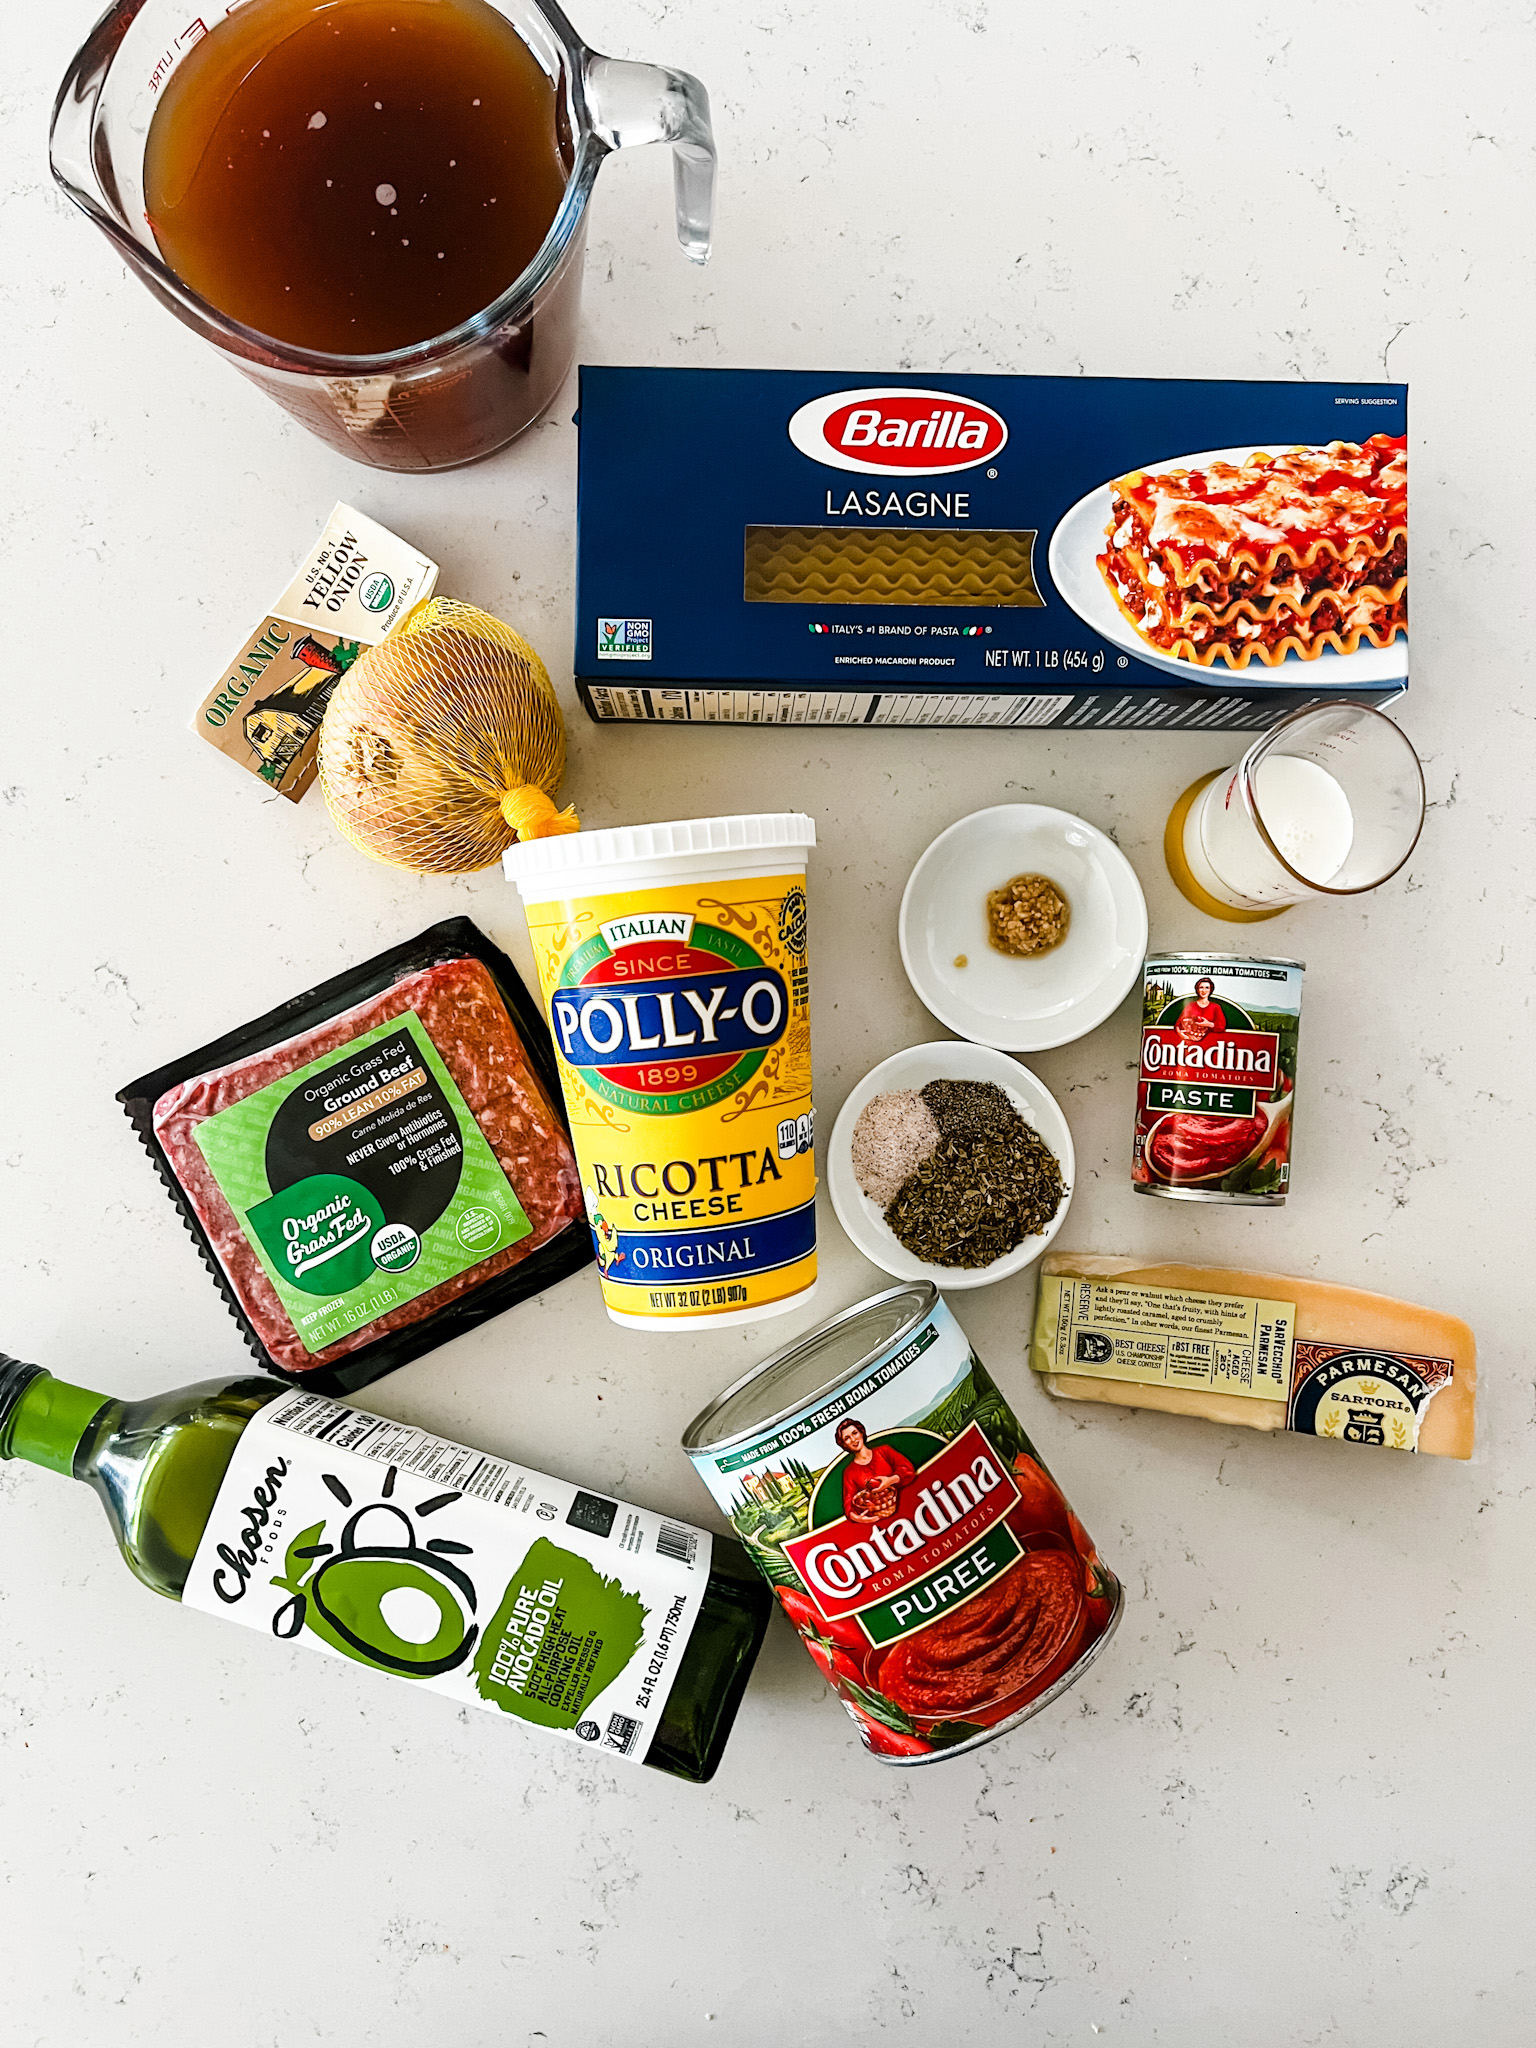 Overhead photo of a package of lasagna noodles, beef broth, ricotta, ground beef, oil, onion, garlic, parmesan, tomato puree, tomato paste, and seasonings.